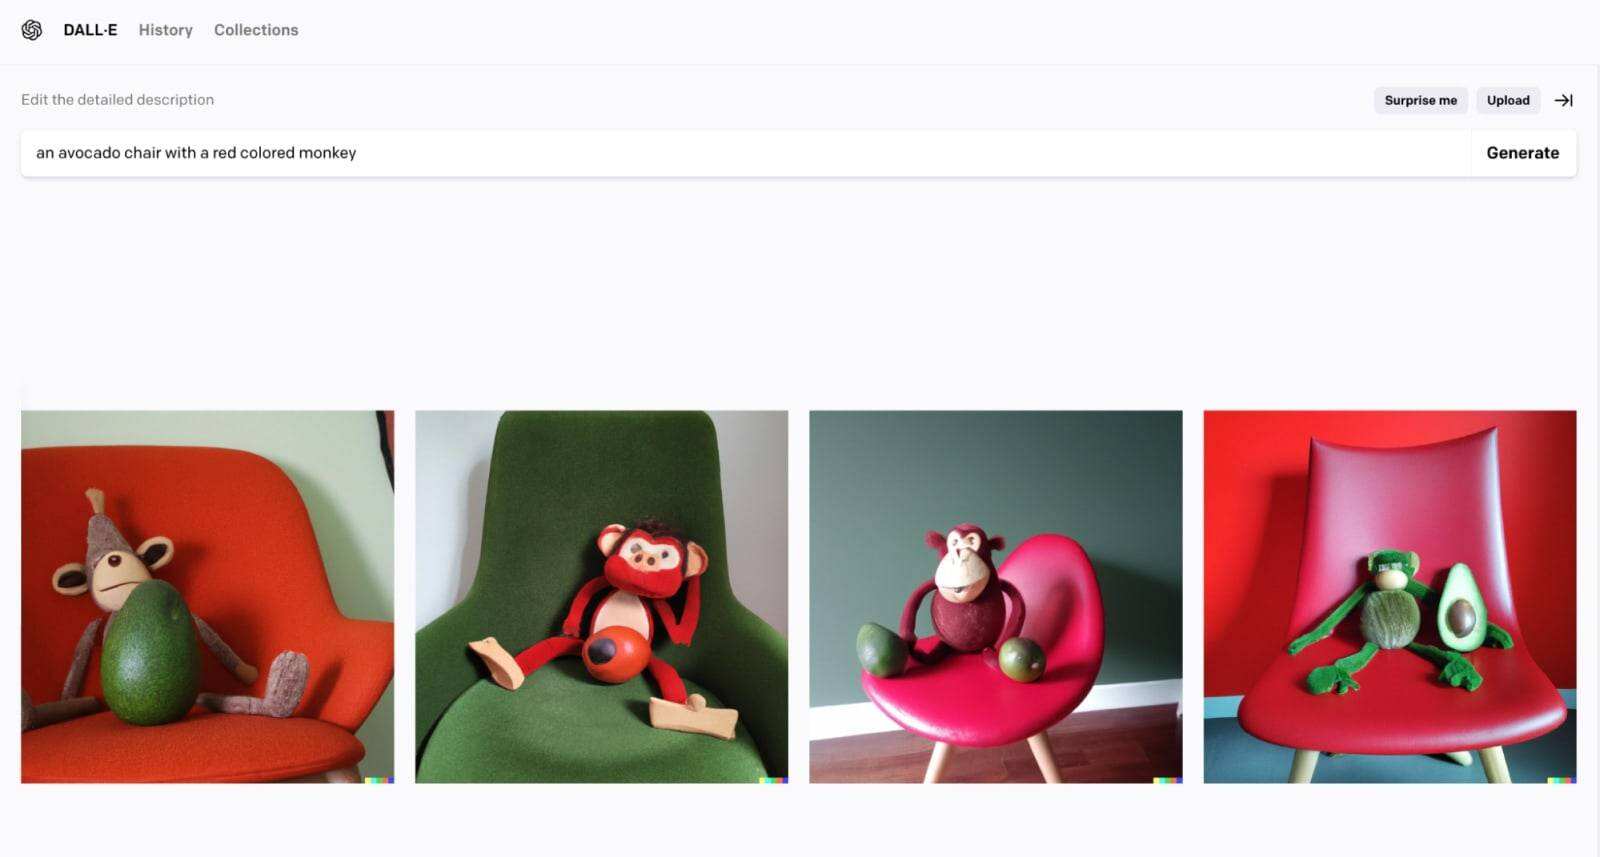 An avocado chair and a red monkey picture 2